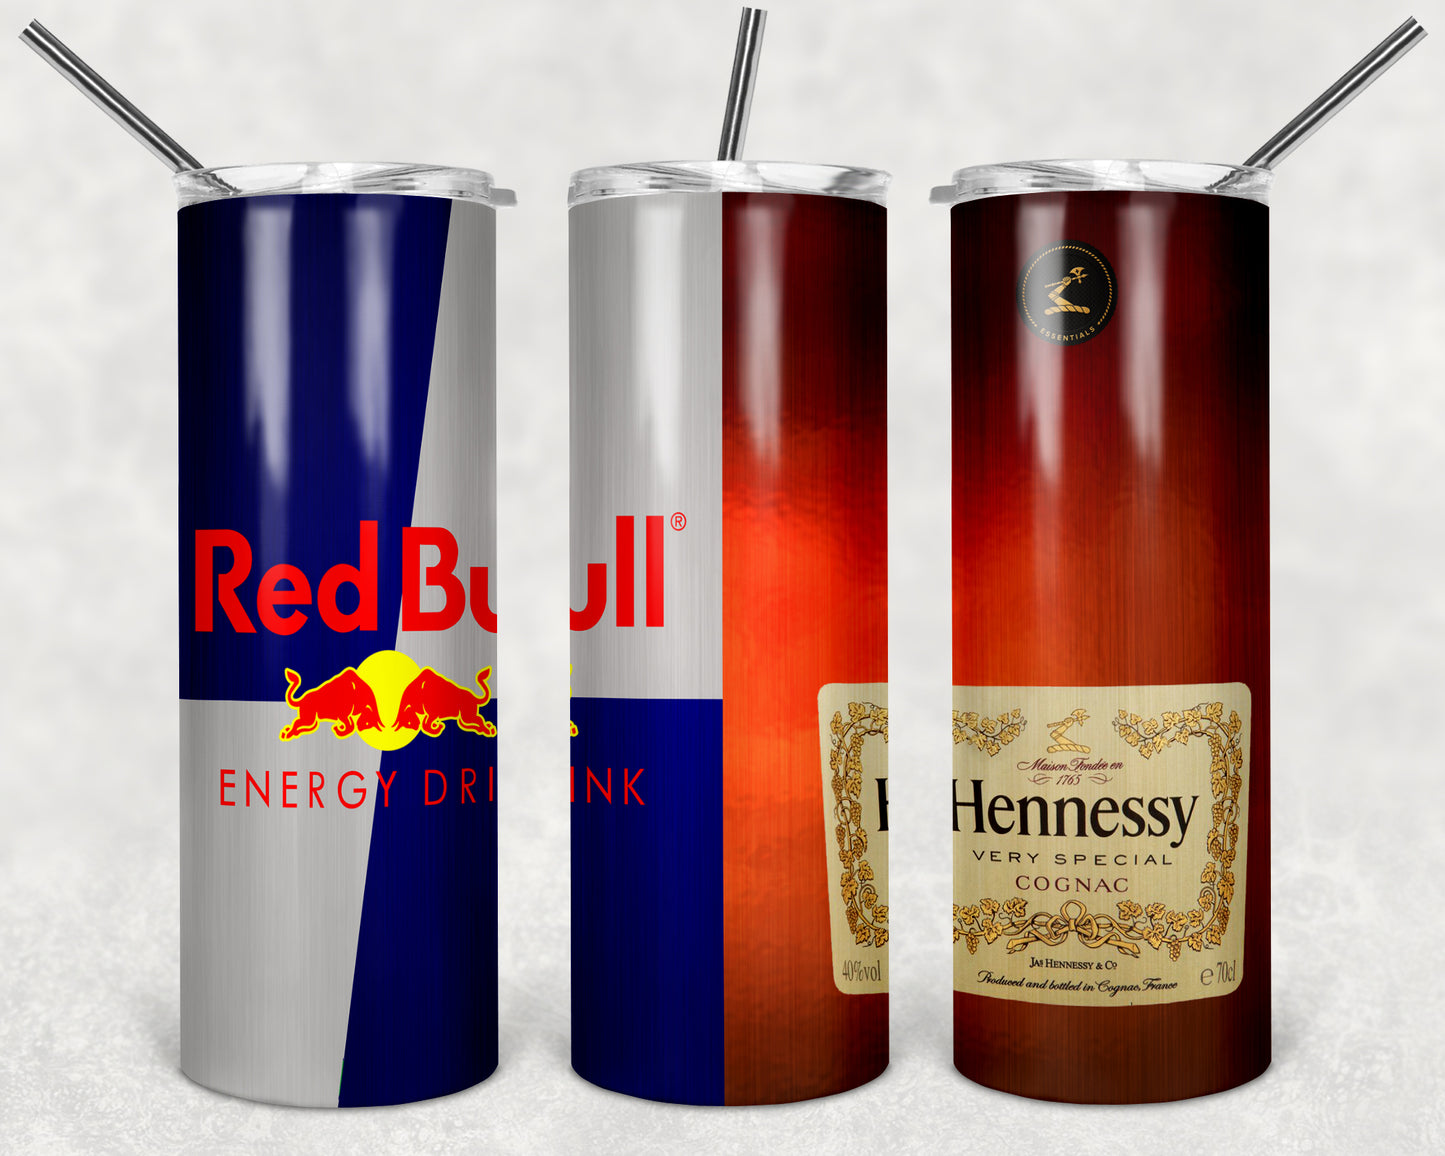 RED BULL AND HENNESSY